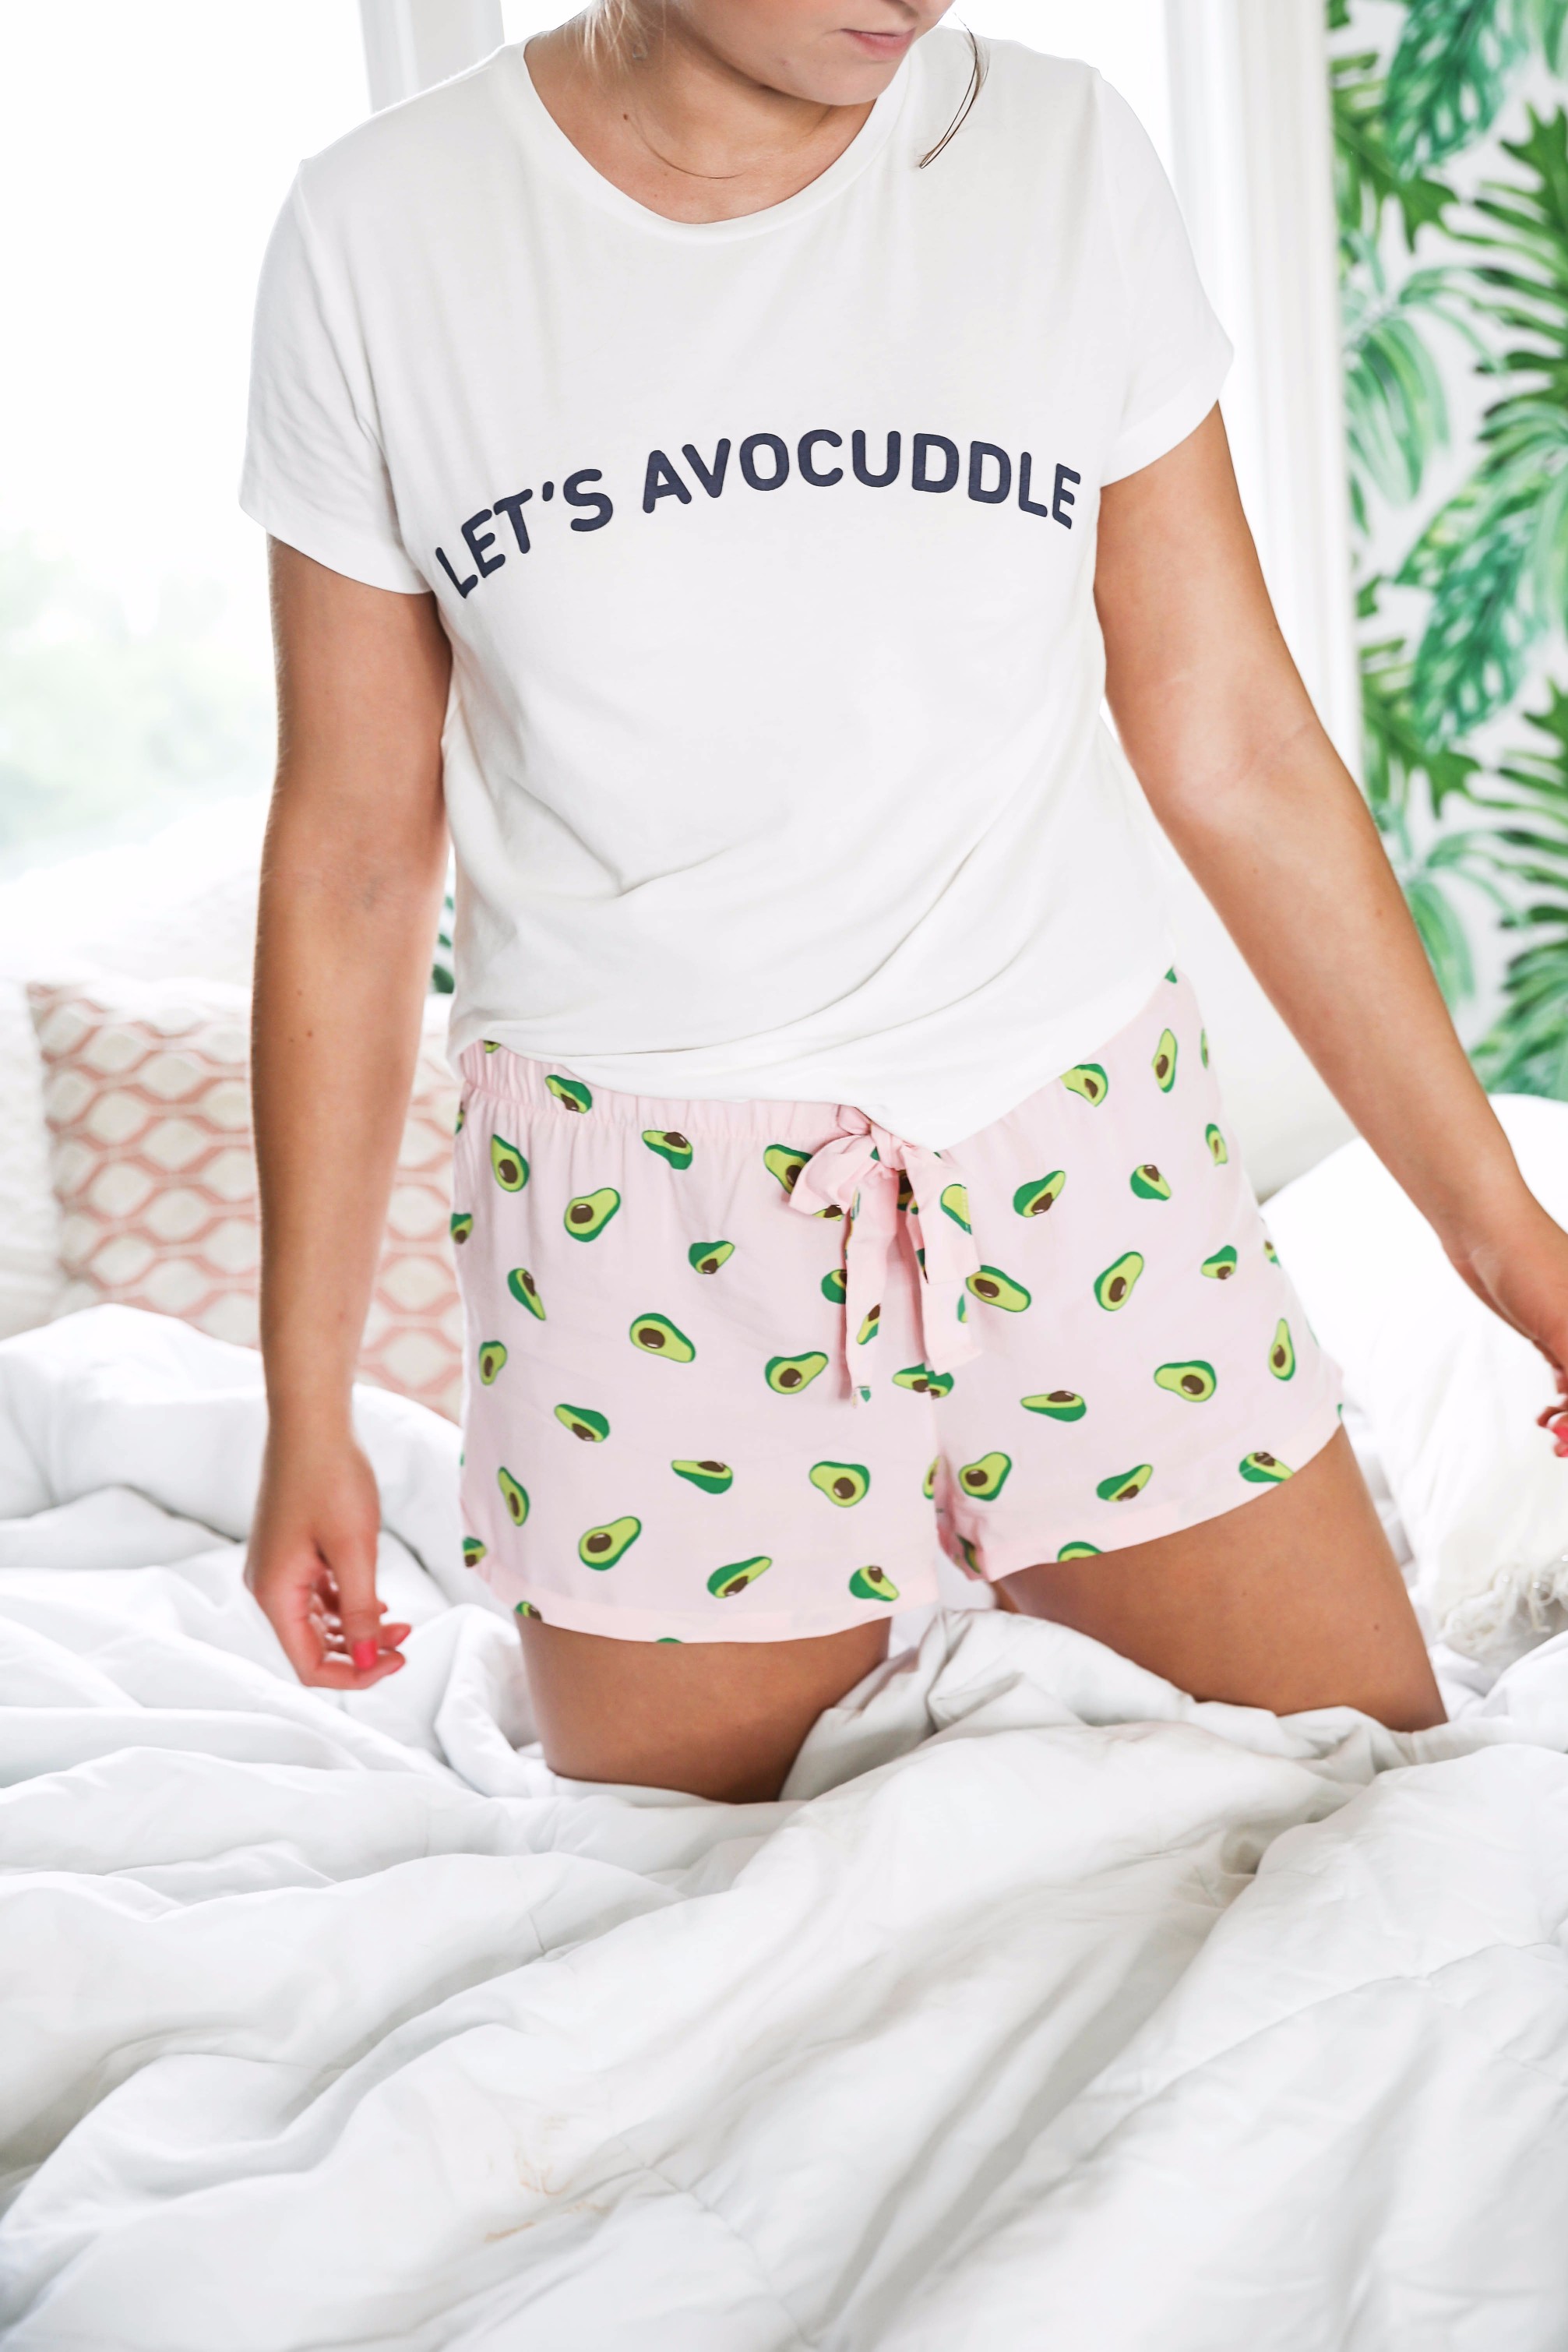 Avocado pink pajamas that say let's avocuddle! How adorable are these pjs?! Super inexpensive! on fashion blog daily dose of charm by lauren lindmark